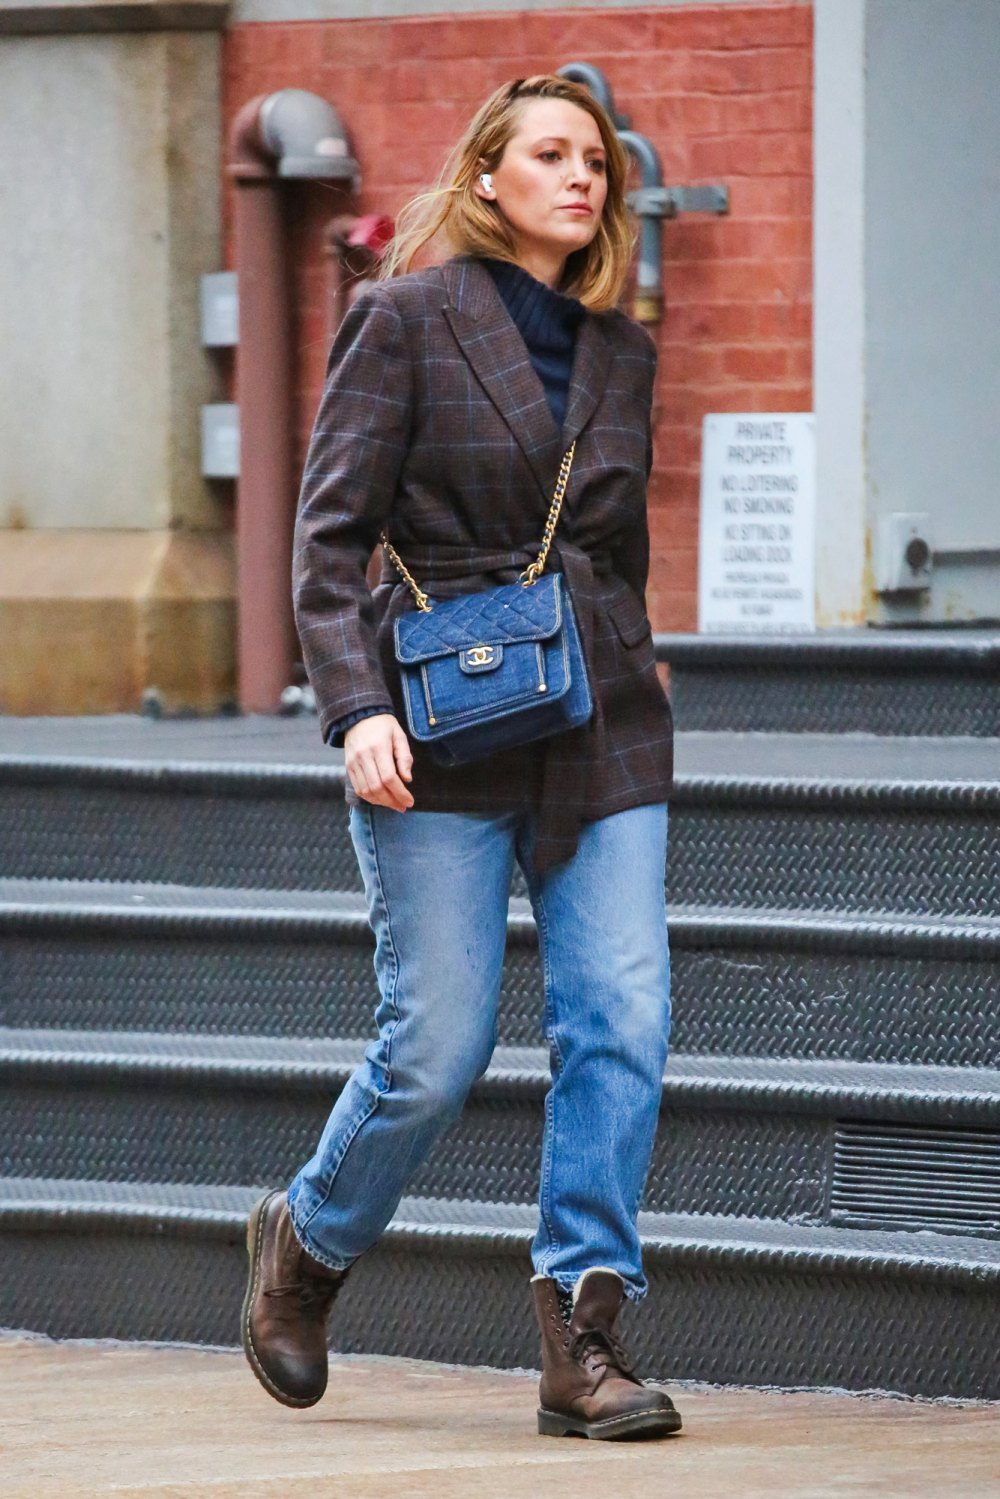 Blake Lively Wears Baggy Jeans With a Denim Chanel Bag in NYC